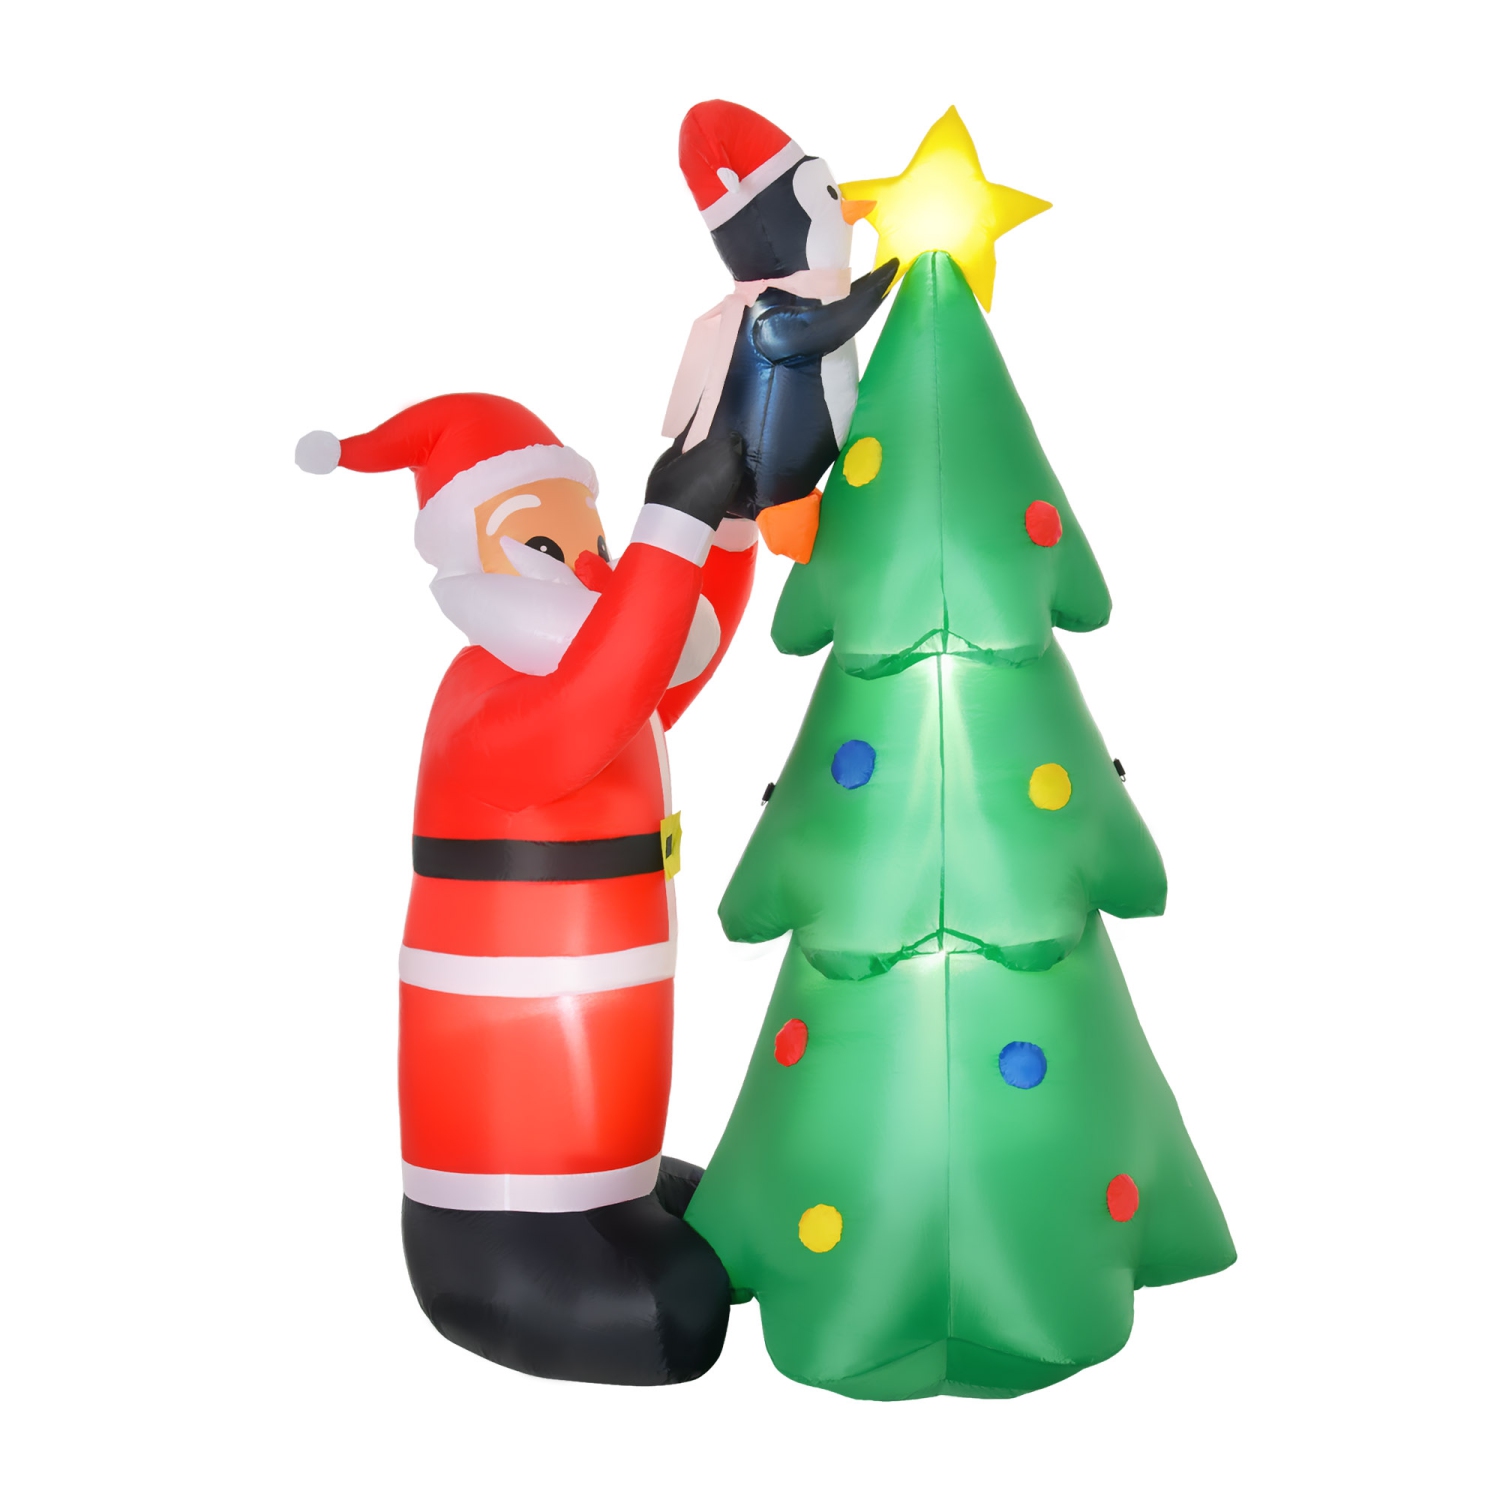 HOMCOM 6ft Christmas Inflatable Santa Claus and Christmas Tree with LED Lights, Blow-Up Outdoor LED Yard Display for Lawn, Garden, Party